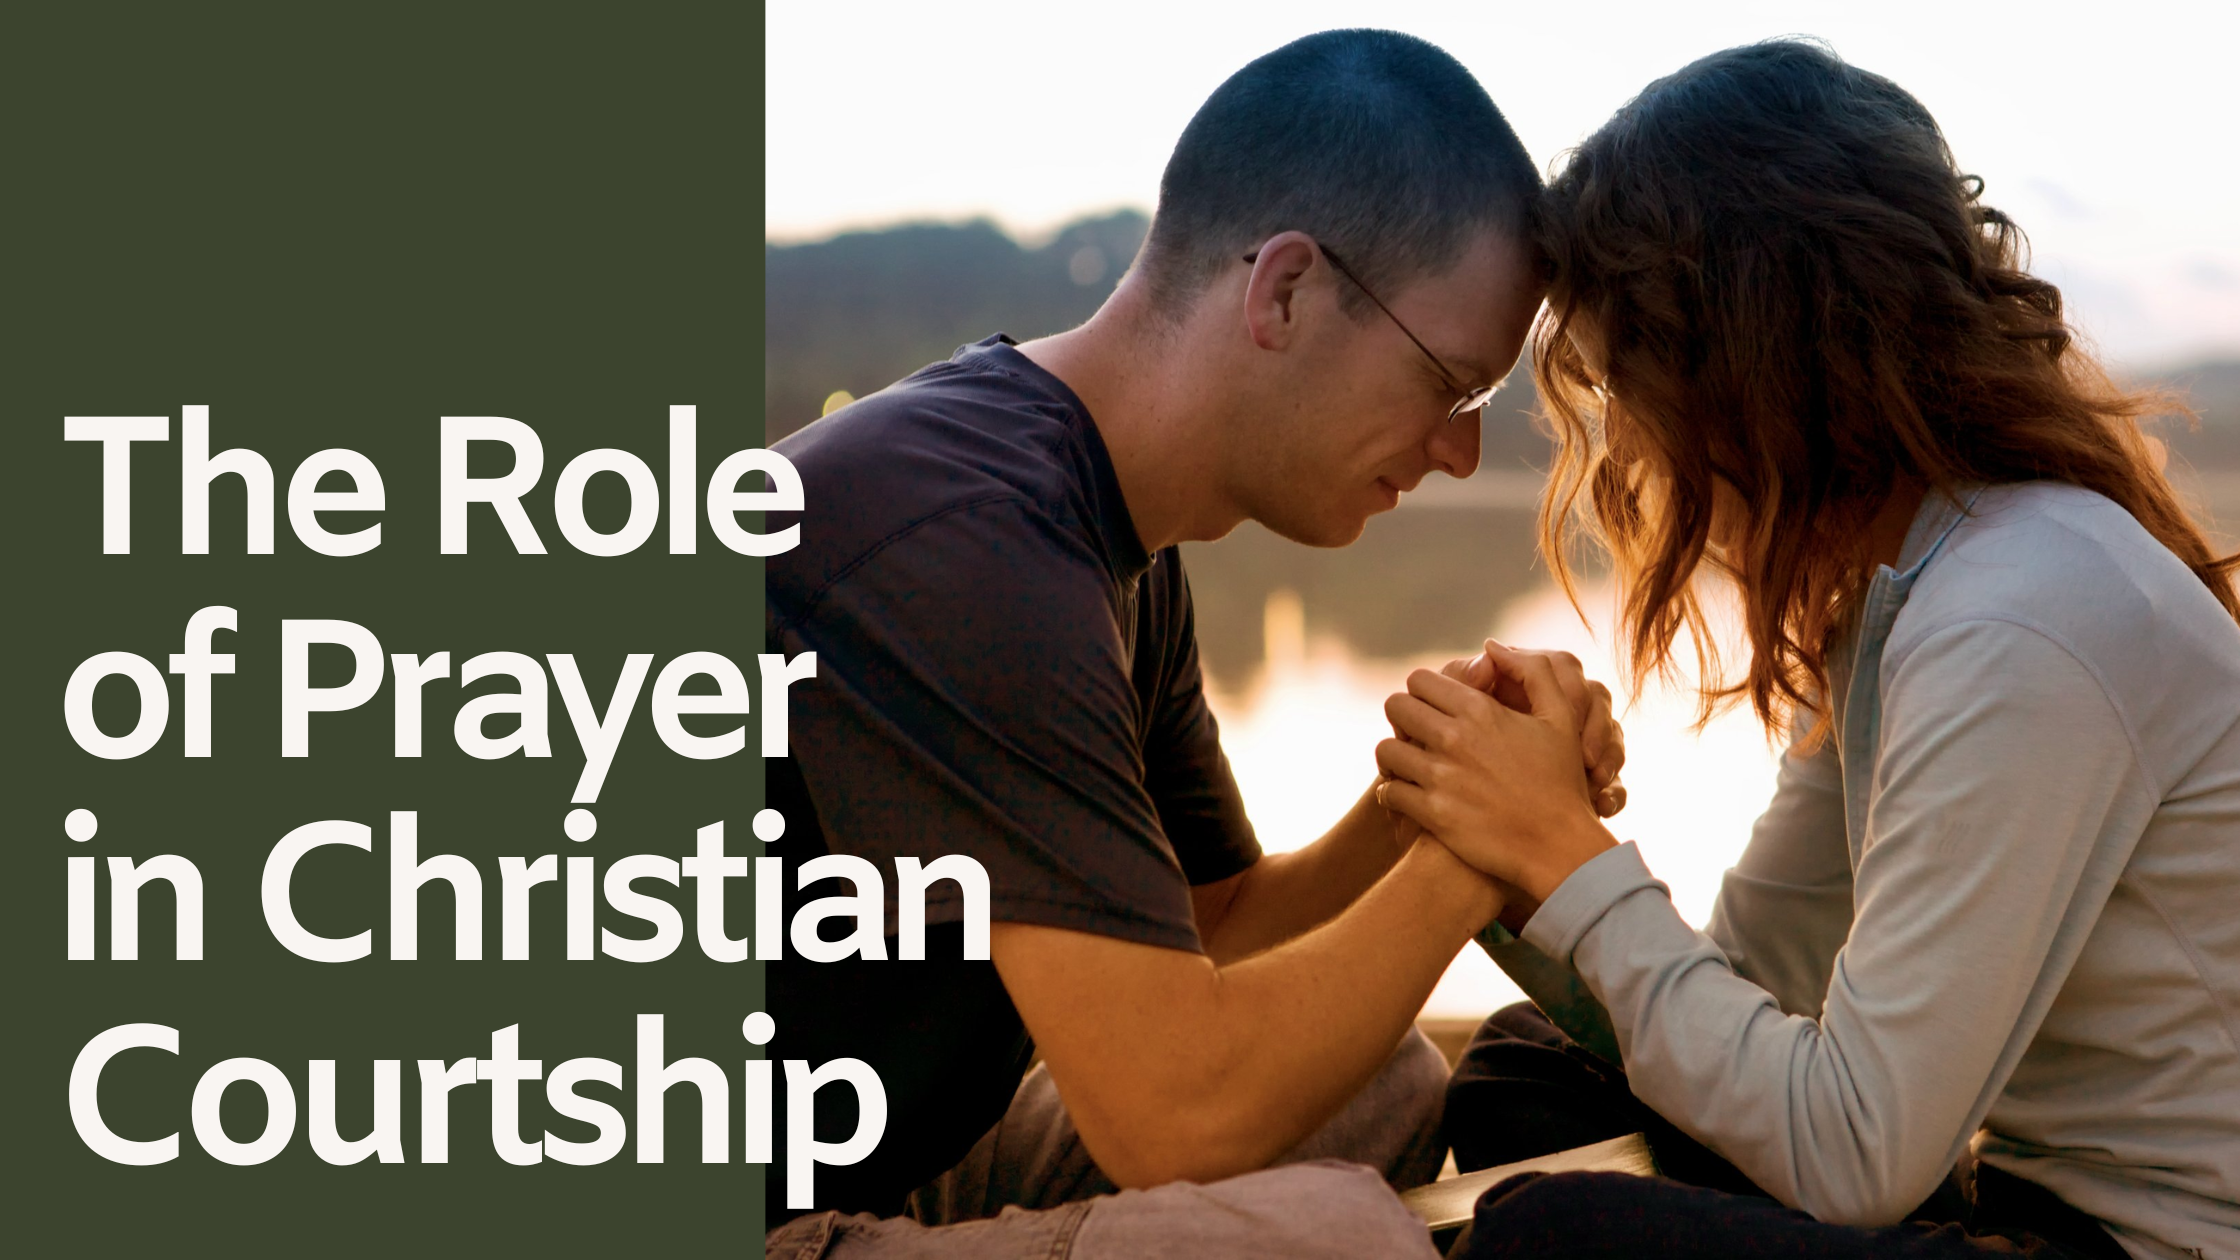 The Role of Prayer in Christian Courtship